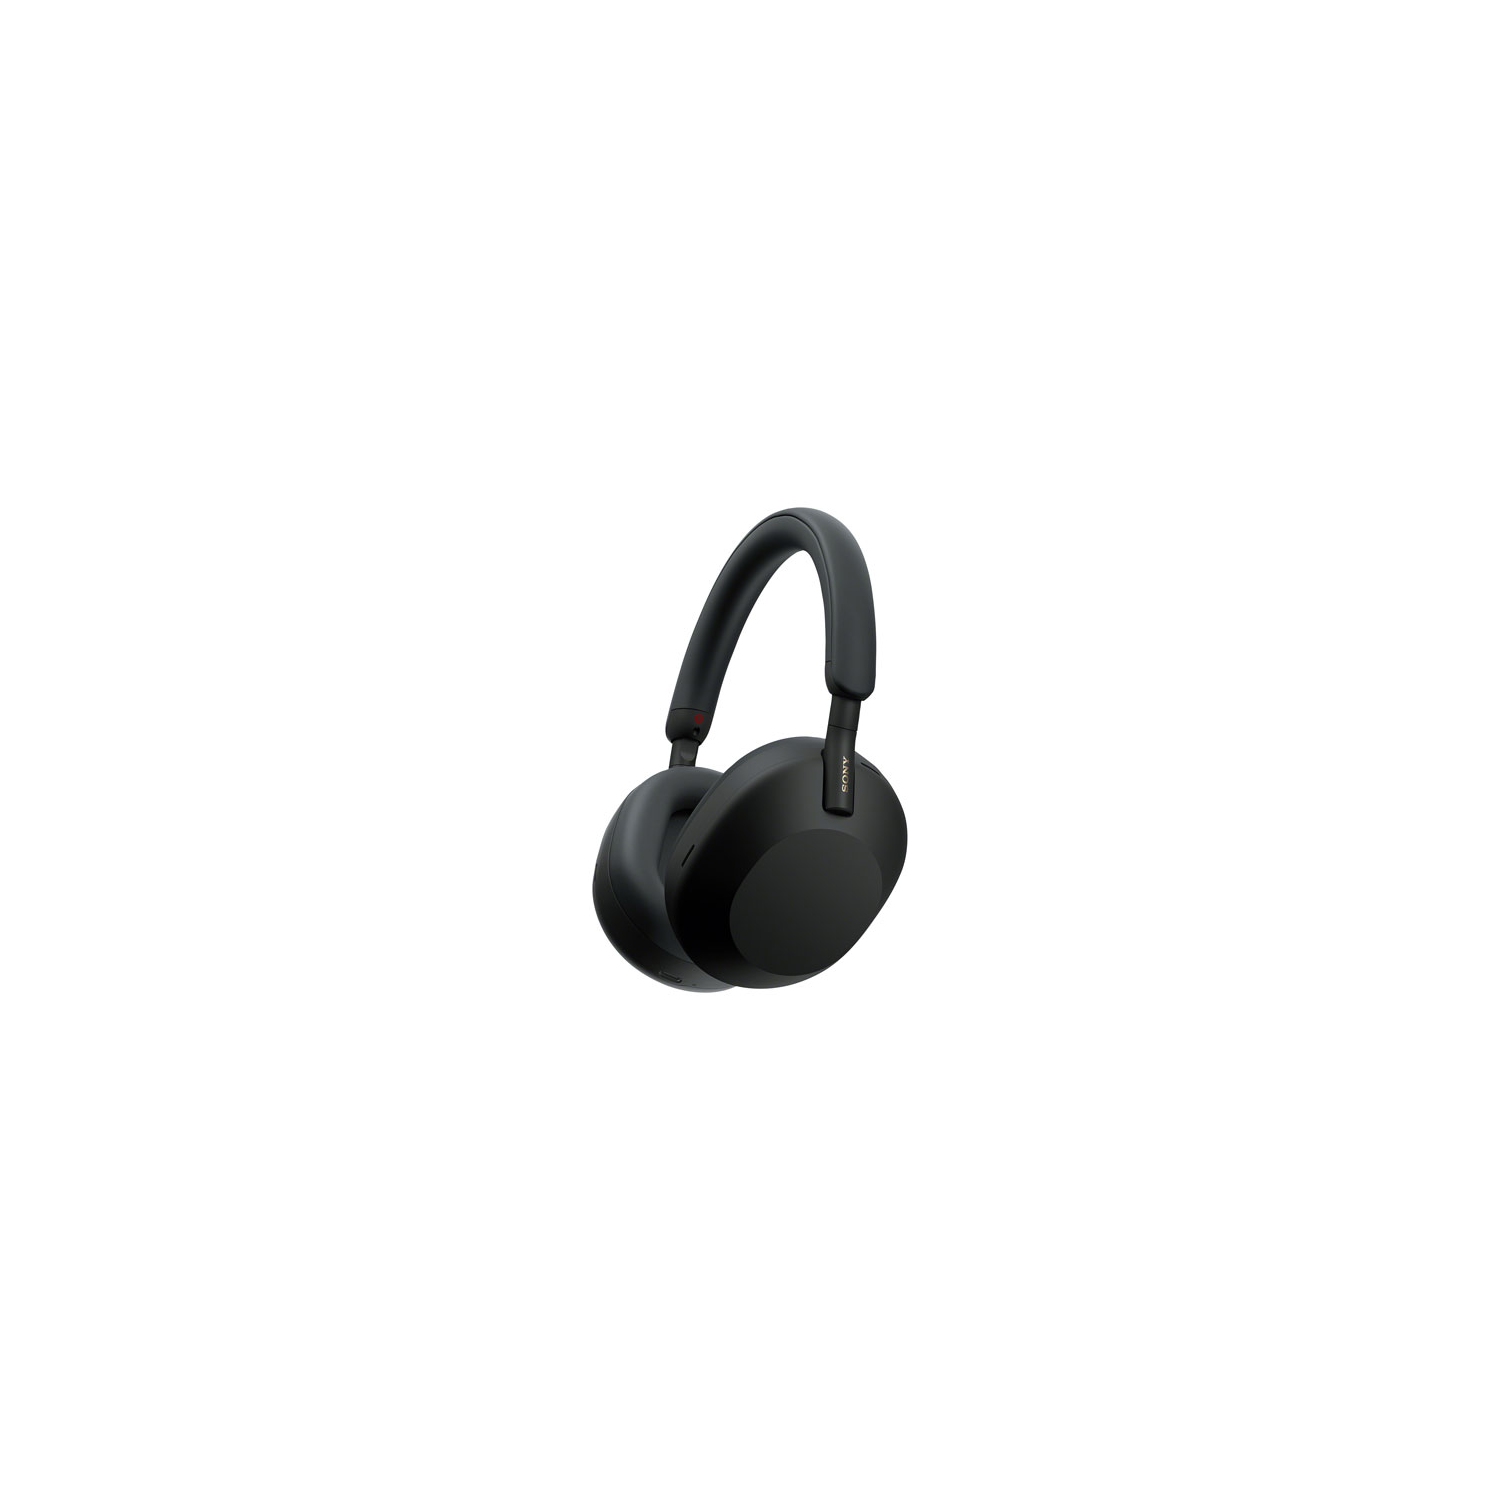 Refurbished (Good) - Sony WH-1000XM5 Over-Ear Noise Cancelling Bluetooth Headphones - Black